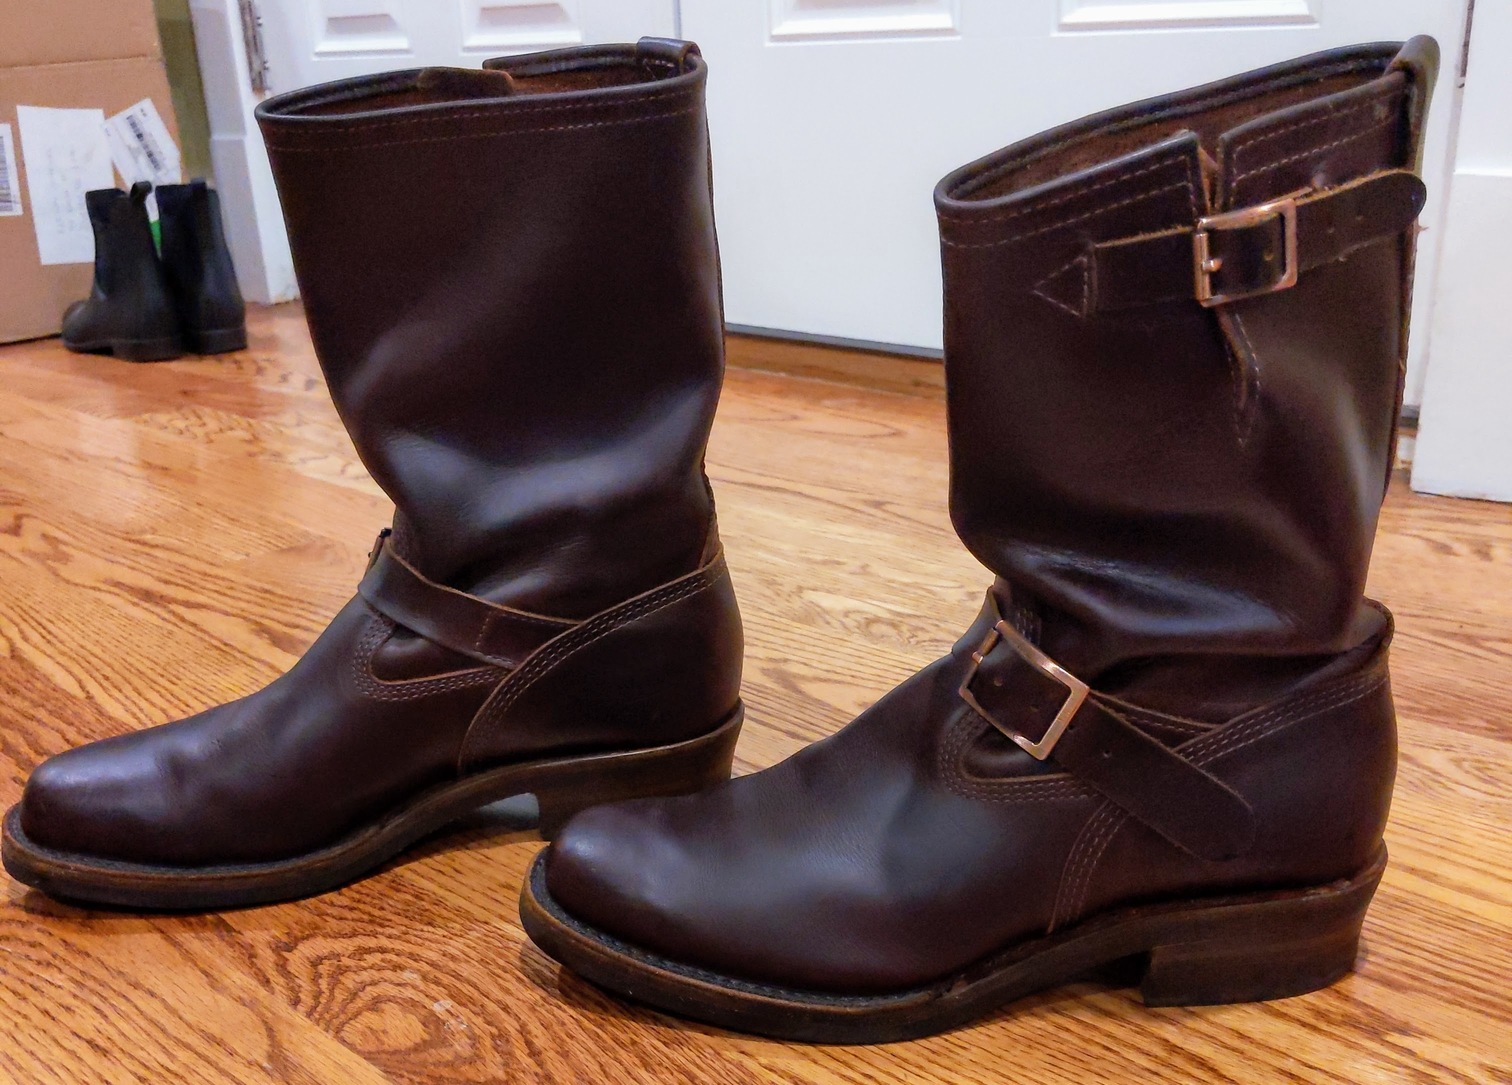 wesco engineer boots for sale